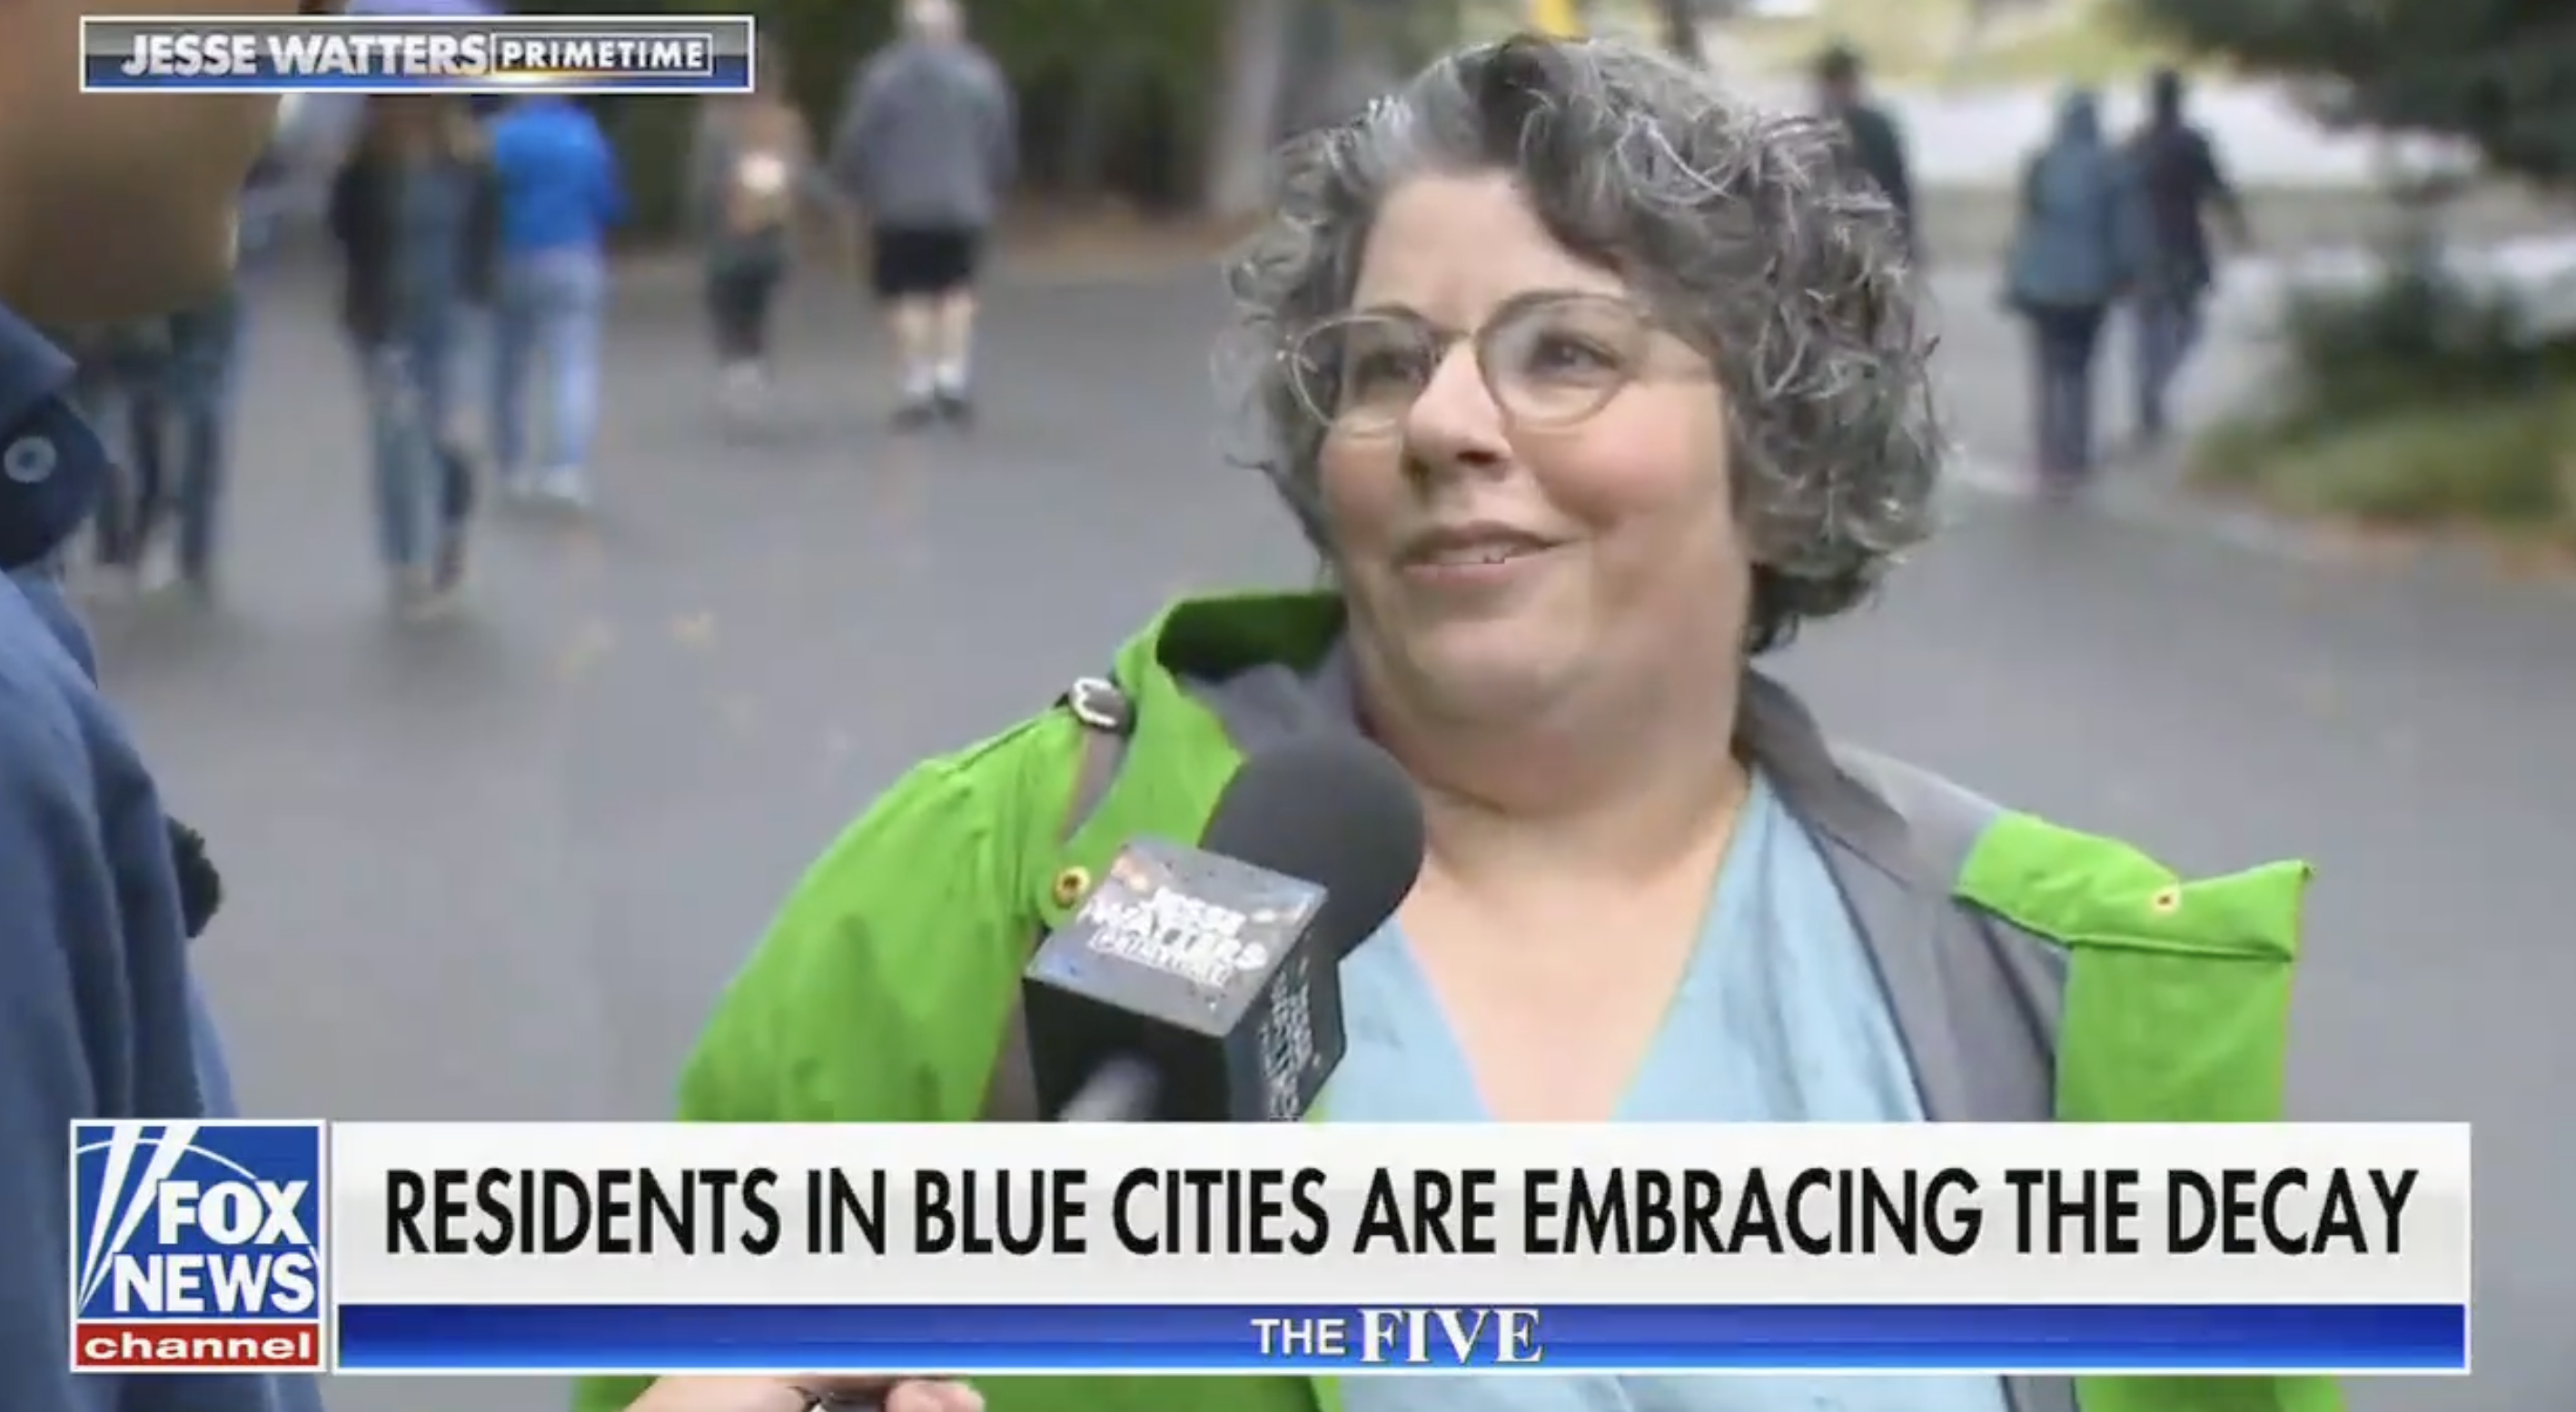 &quot;Residents in blue cities are embracing the decay&quot;